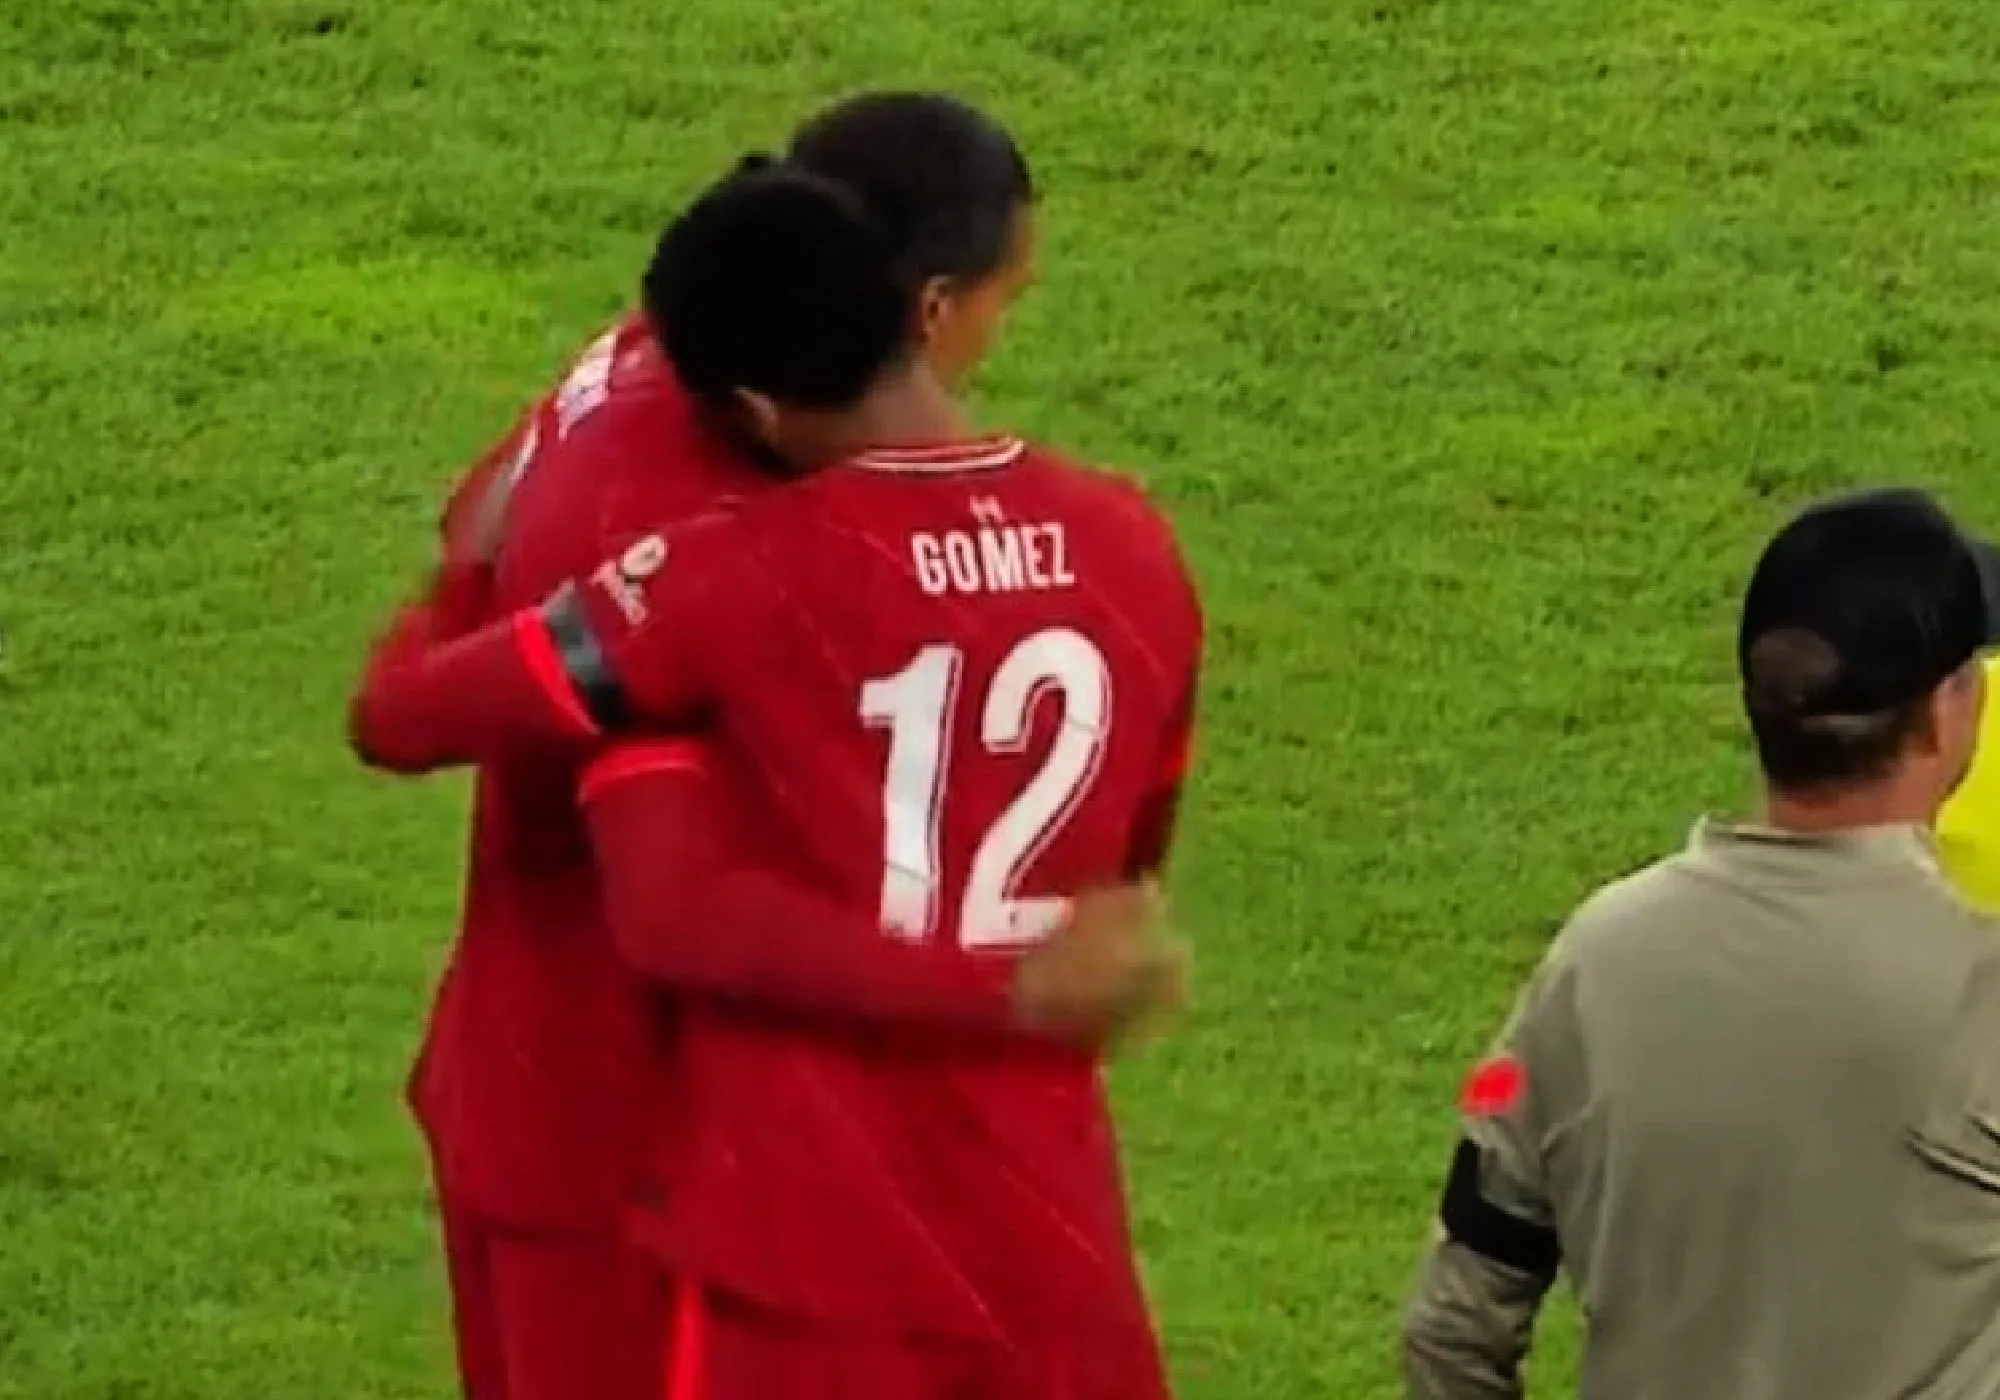 Virgil van Dijk and Joe Gomez share a hug on the touchline as the Liverpool centre-back duo make their much-awaited return to action against Hertha Berlin